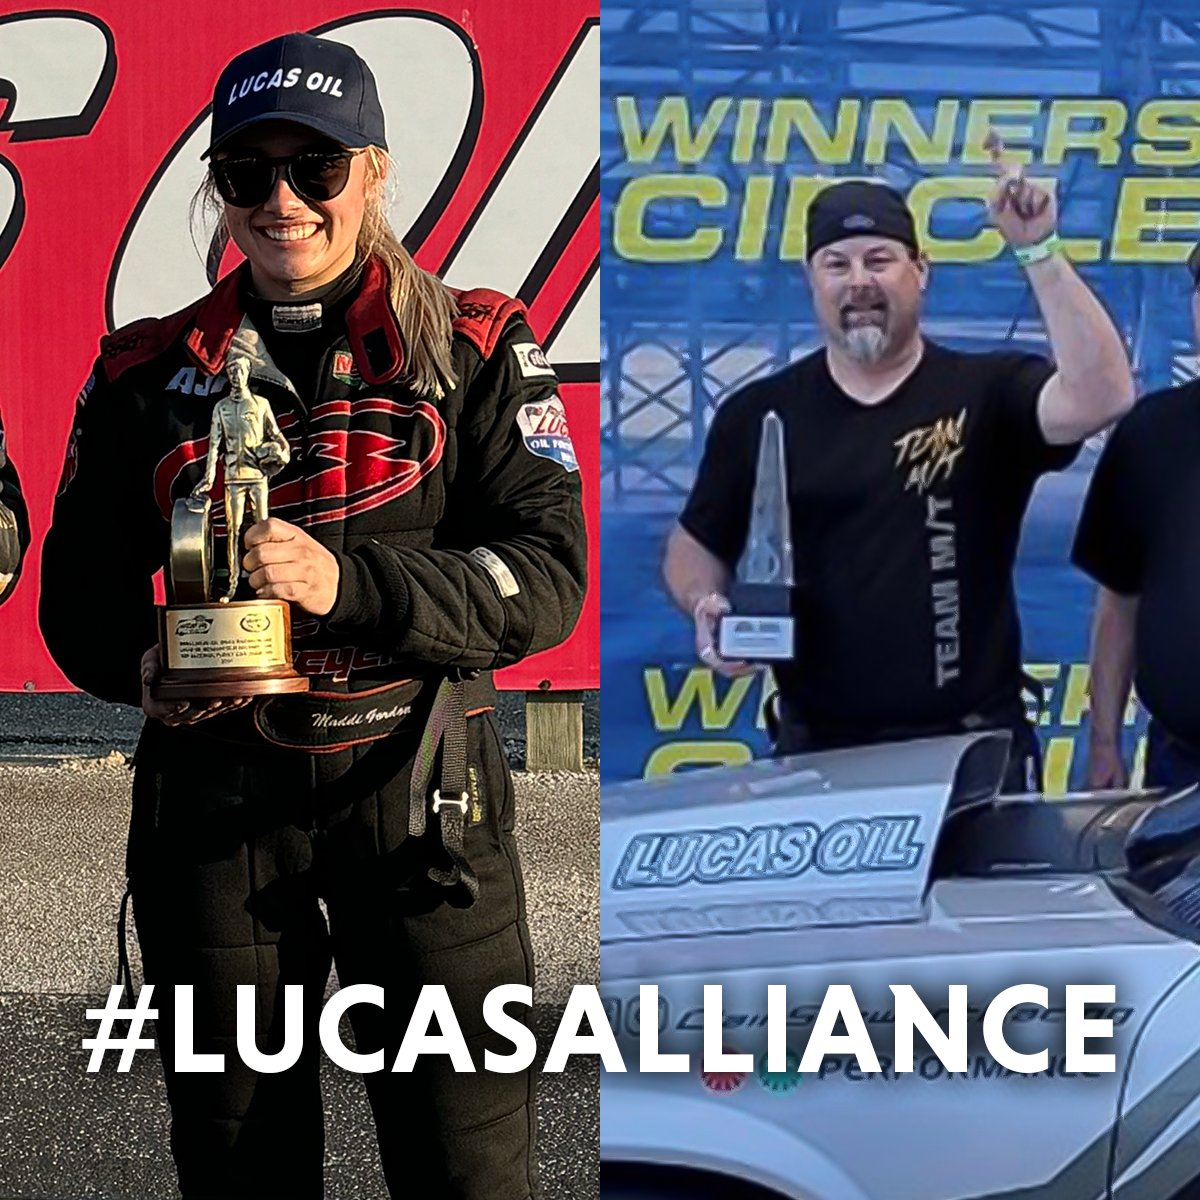 🎉 It's #WinningWednesday, let's celebrate our #LucasAlliance!

🏆 Starting off with Maddi Gordon's first ever @NHRA #TopAlcohol win this past weekend from @RaceIRP!

💪 Then at @WWTRaceway, Clair Stewart Racing had some NMRA Ford Nationals success!

💥 That's how #LucasWorks!